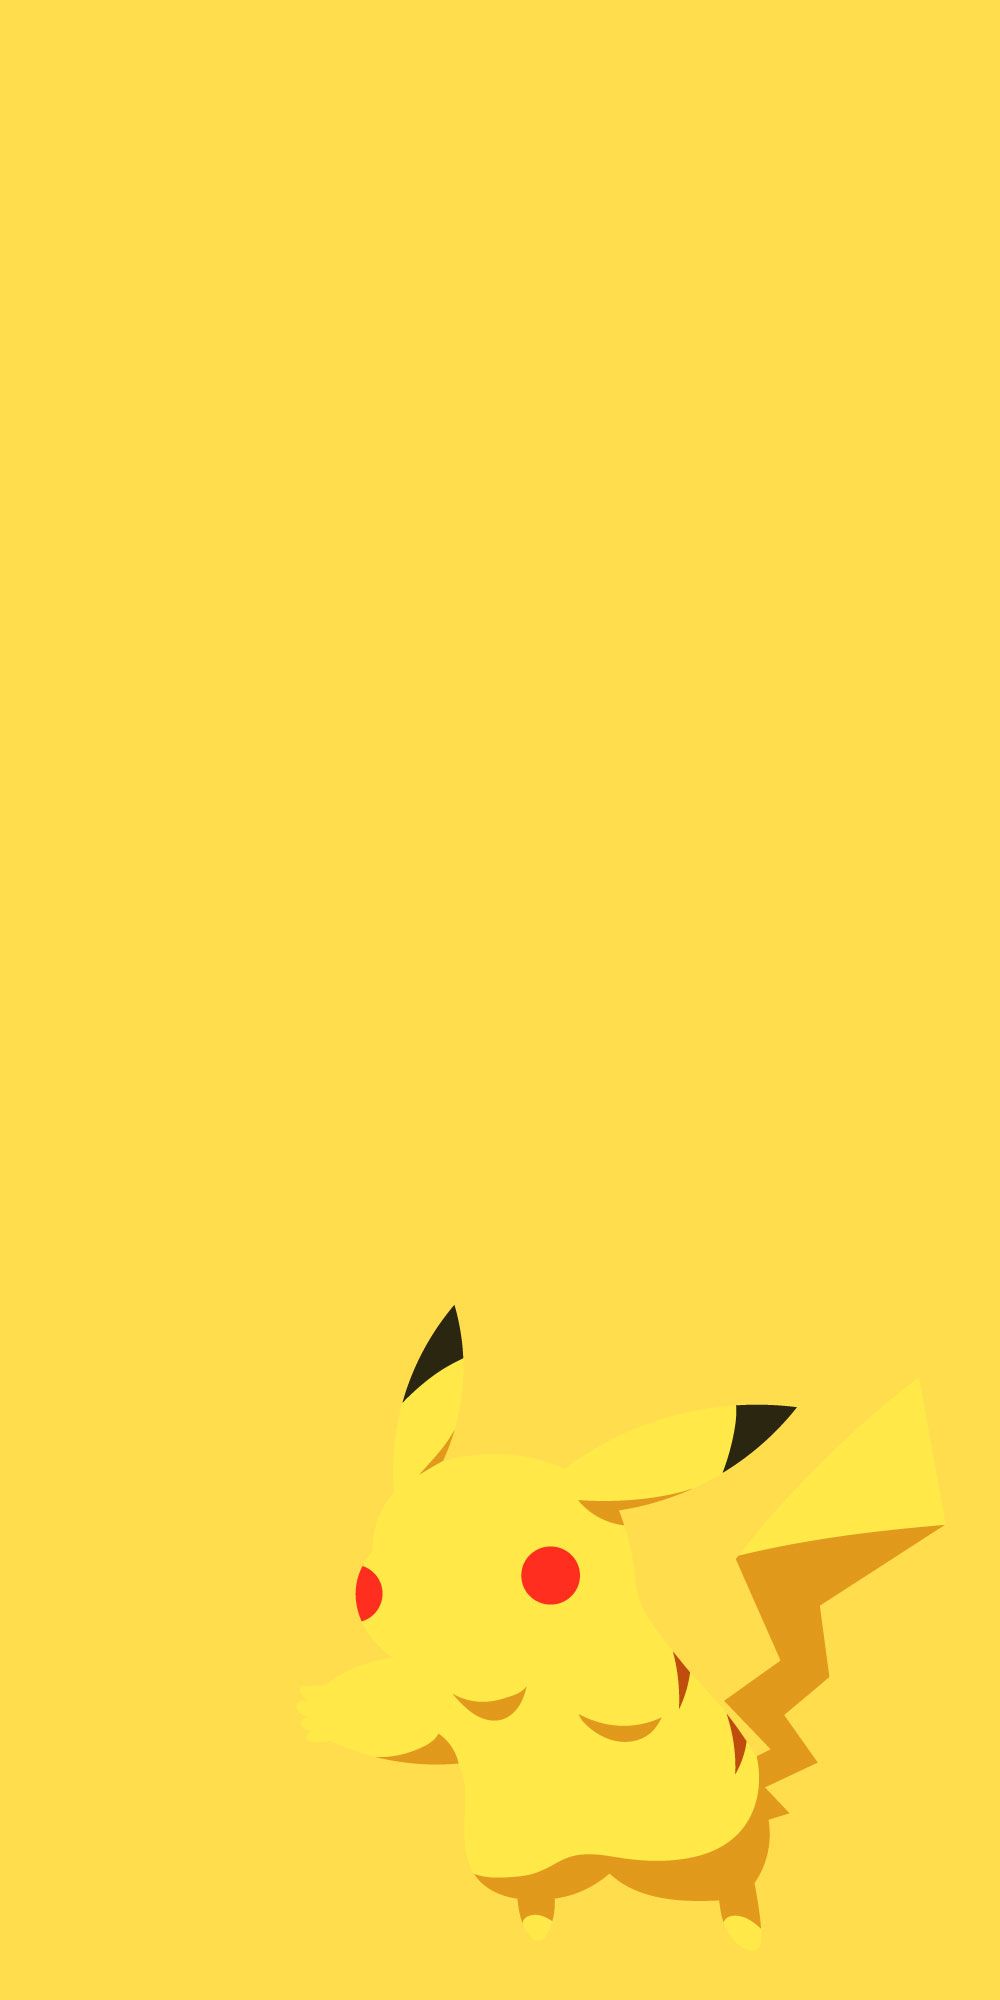 A yellow background with the pikachu character on it - Pikachu